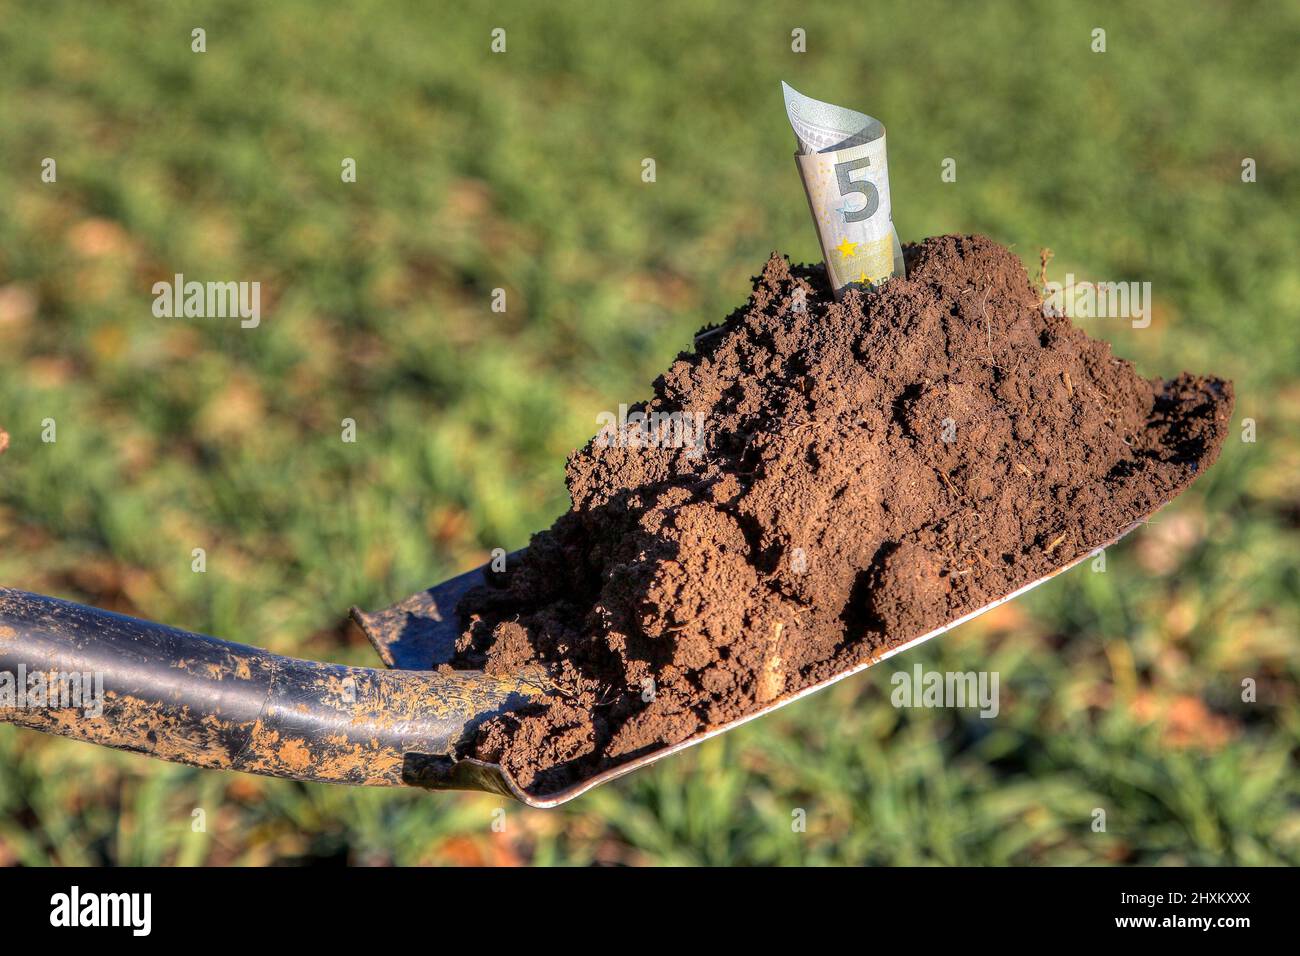 Shovel with fertile soil in which a euro banknote is stuck. The demand for land is increasing worldwide. Stock Photo